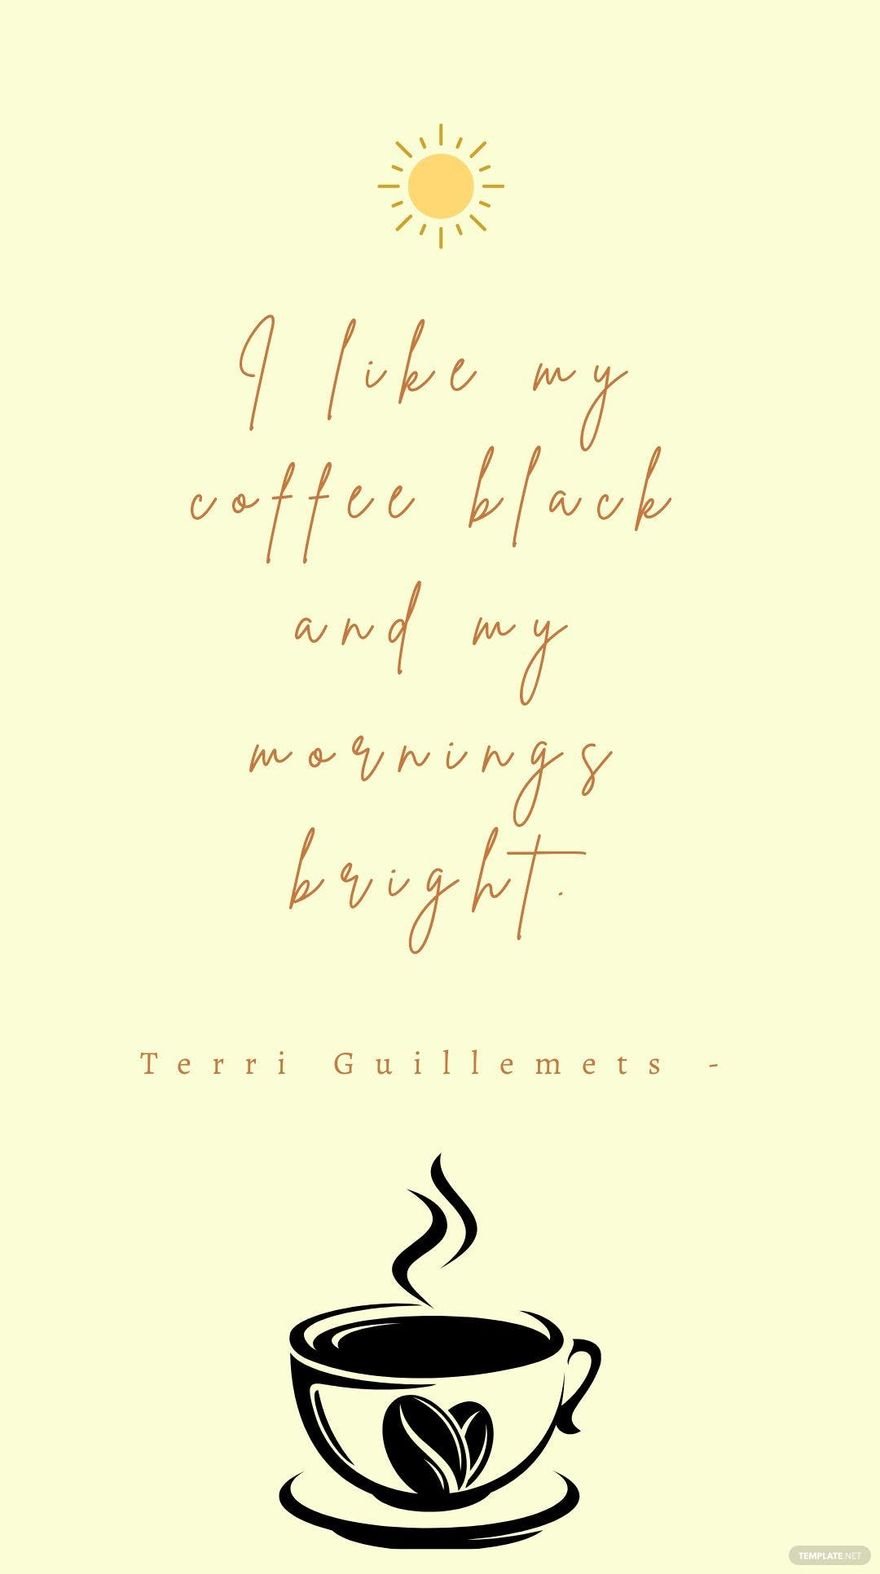 Terri Guillemets - I like my coffee black and my mornings bright.